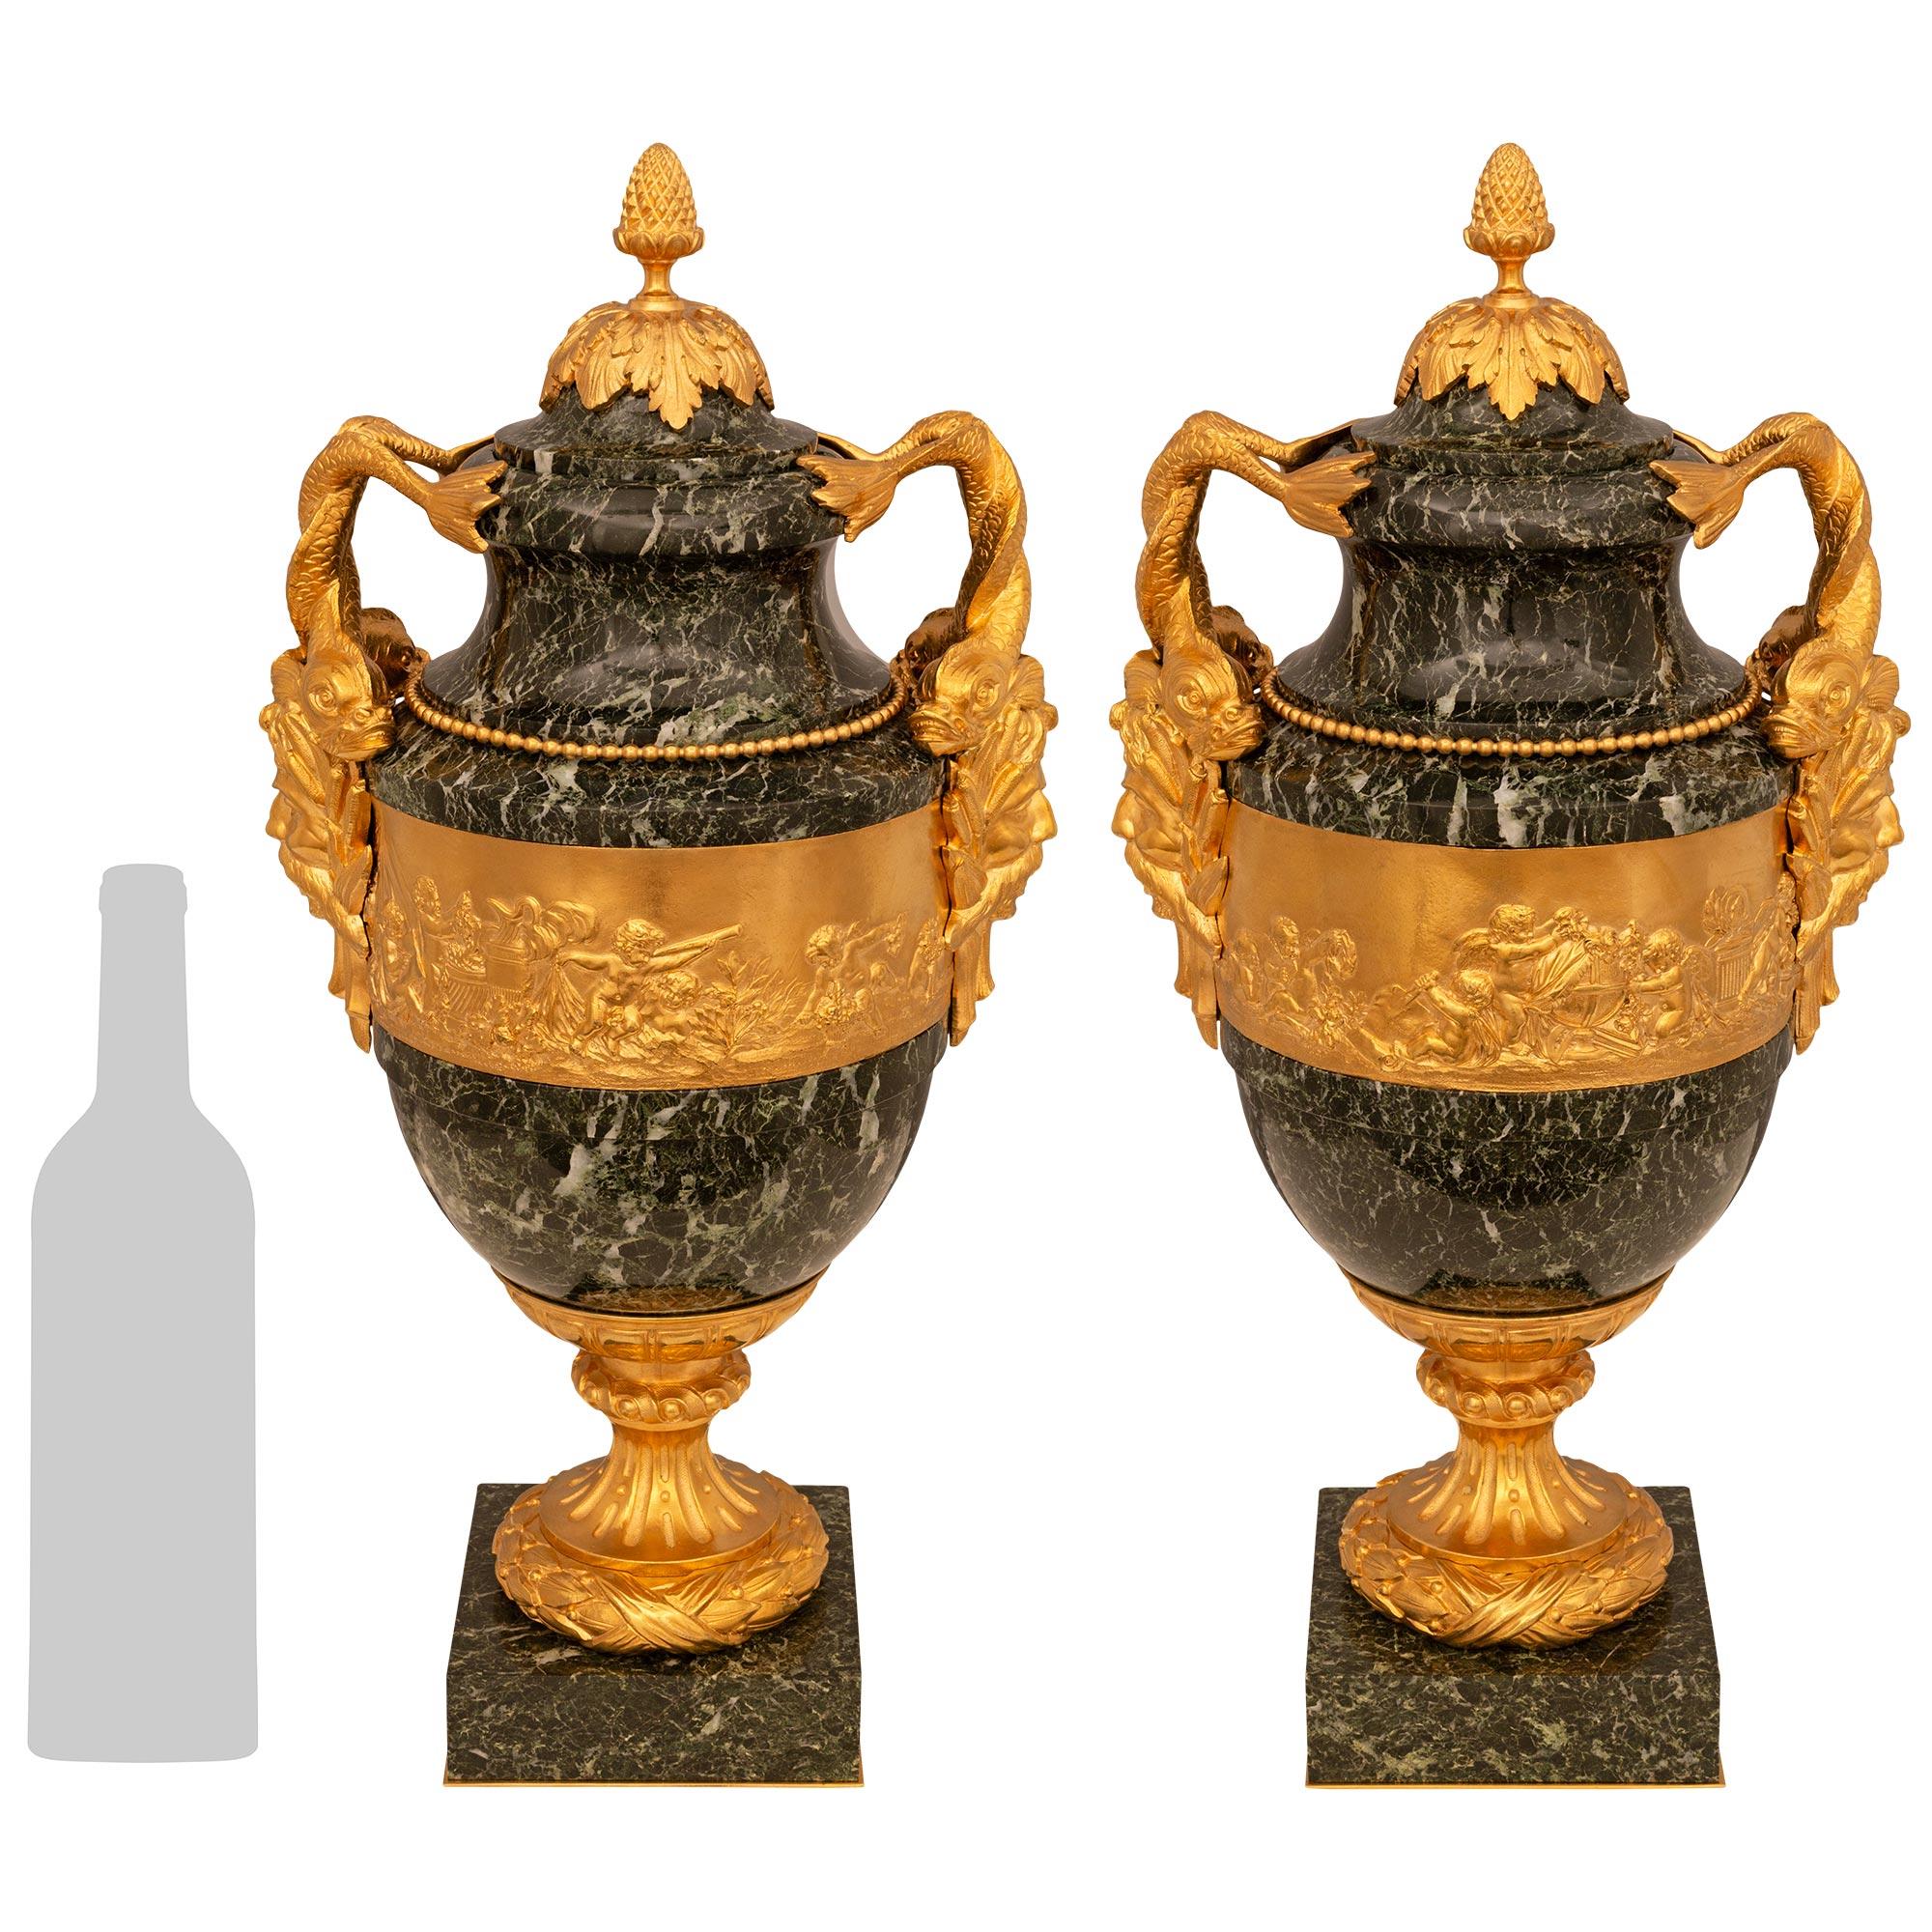 A stunning and high quality pair of French 19th century Louis XVI st. Vert Patricia marble and Ormolu lidded urns. Each urn is raised on a square marble base with a foliate Ormolu socle pedestal above a wrap around laurel band. Each of the Verte